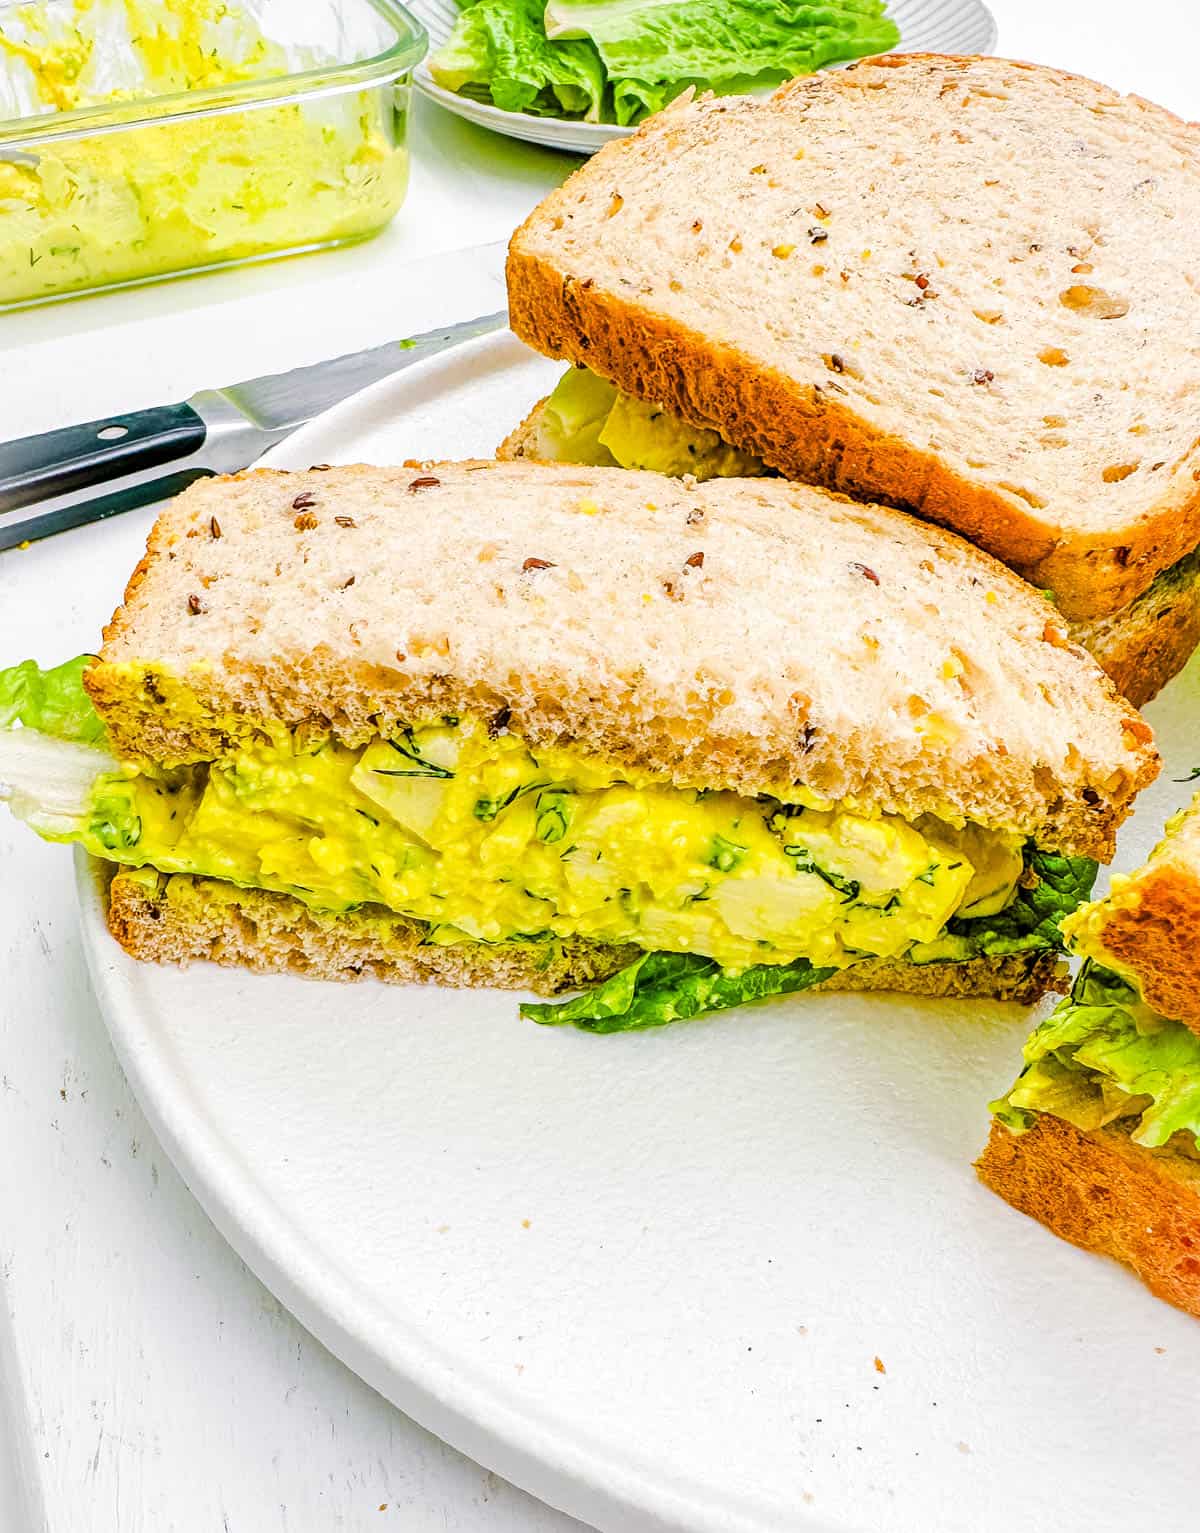 Eggless egg salad sandwich on a white plate.